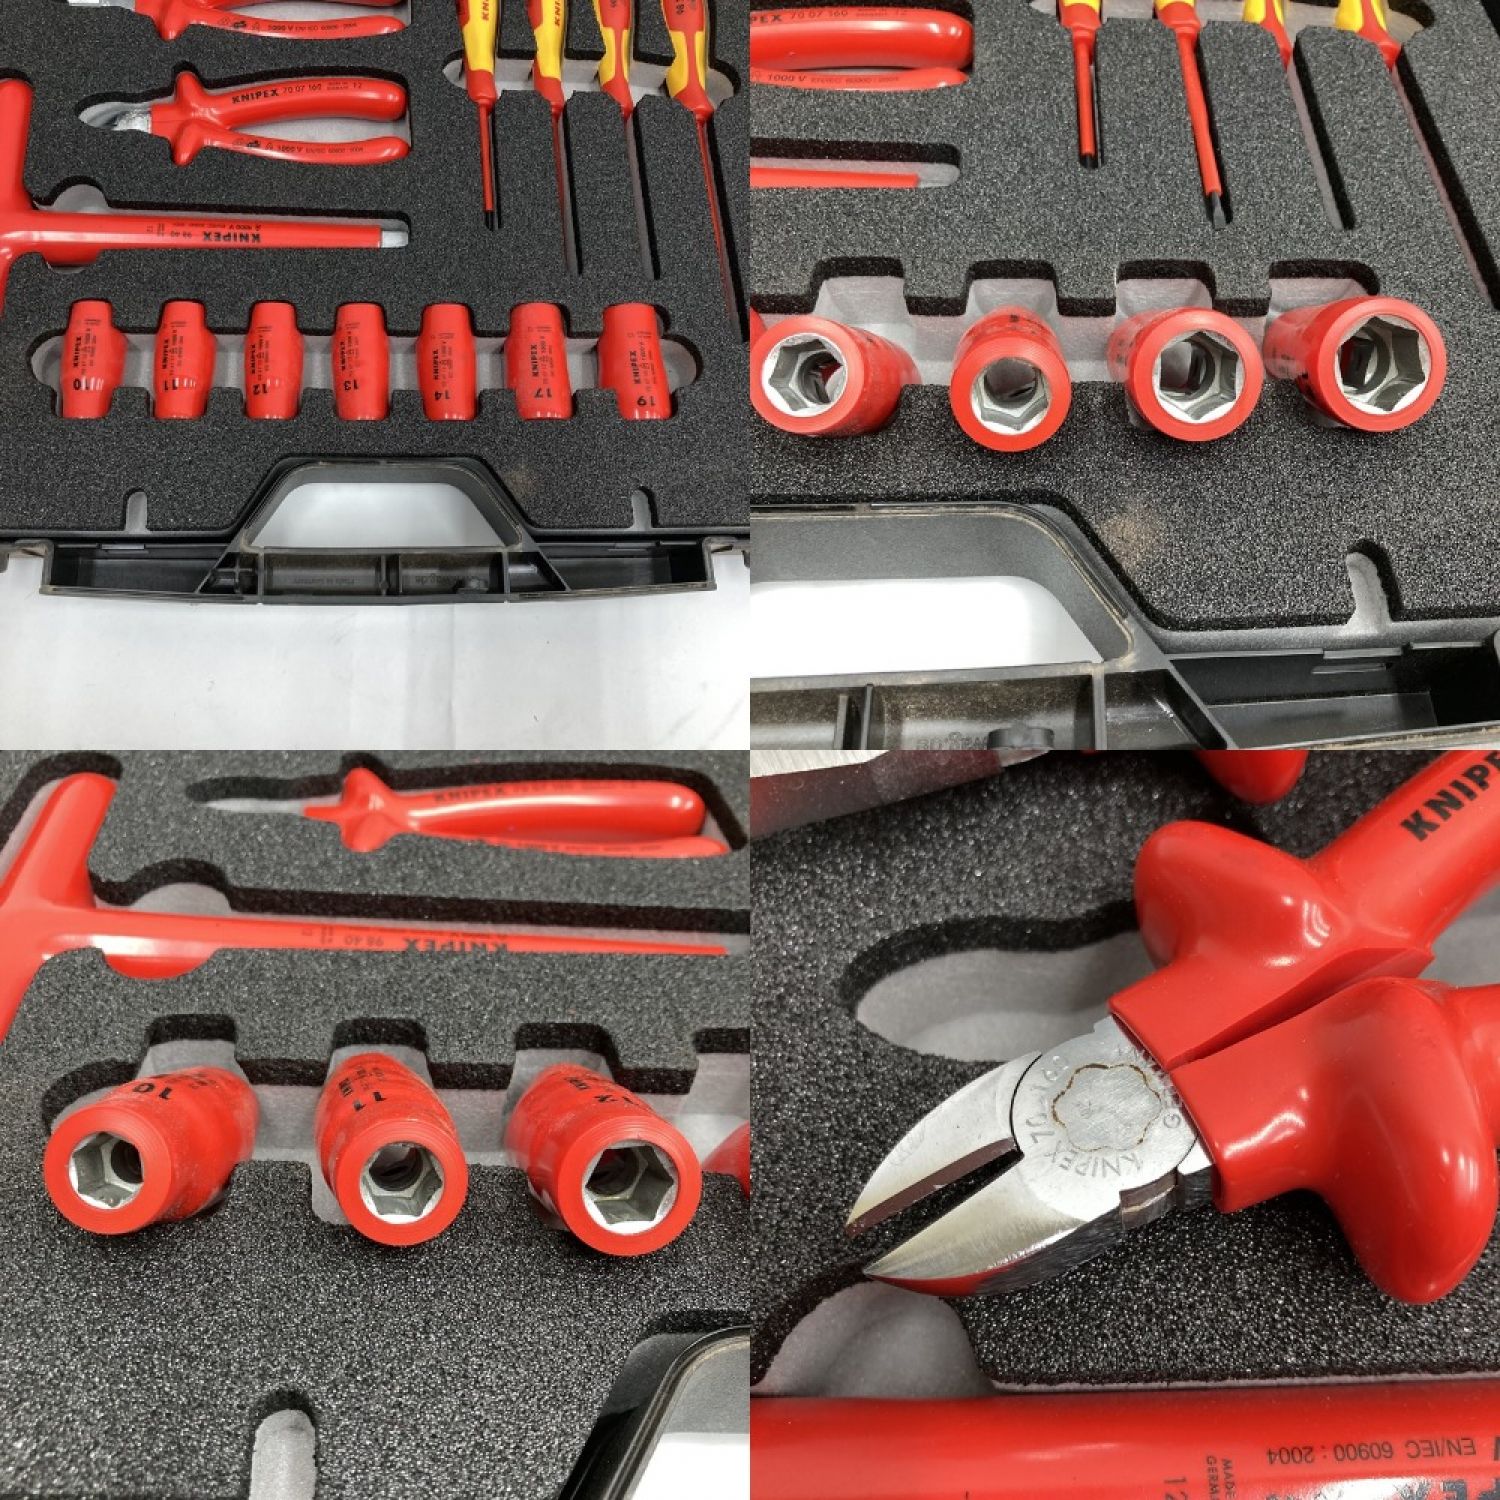 ＫＮＩＰＥＸ 絶縁１０００Ｖソケット １ ２